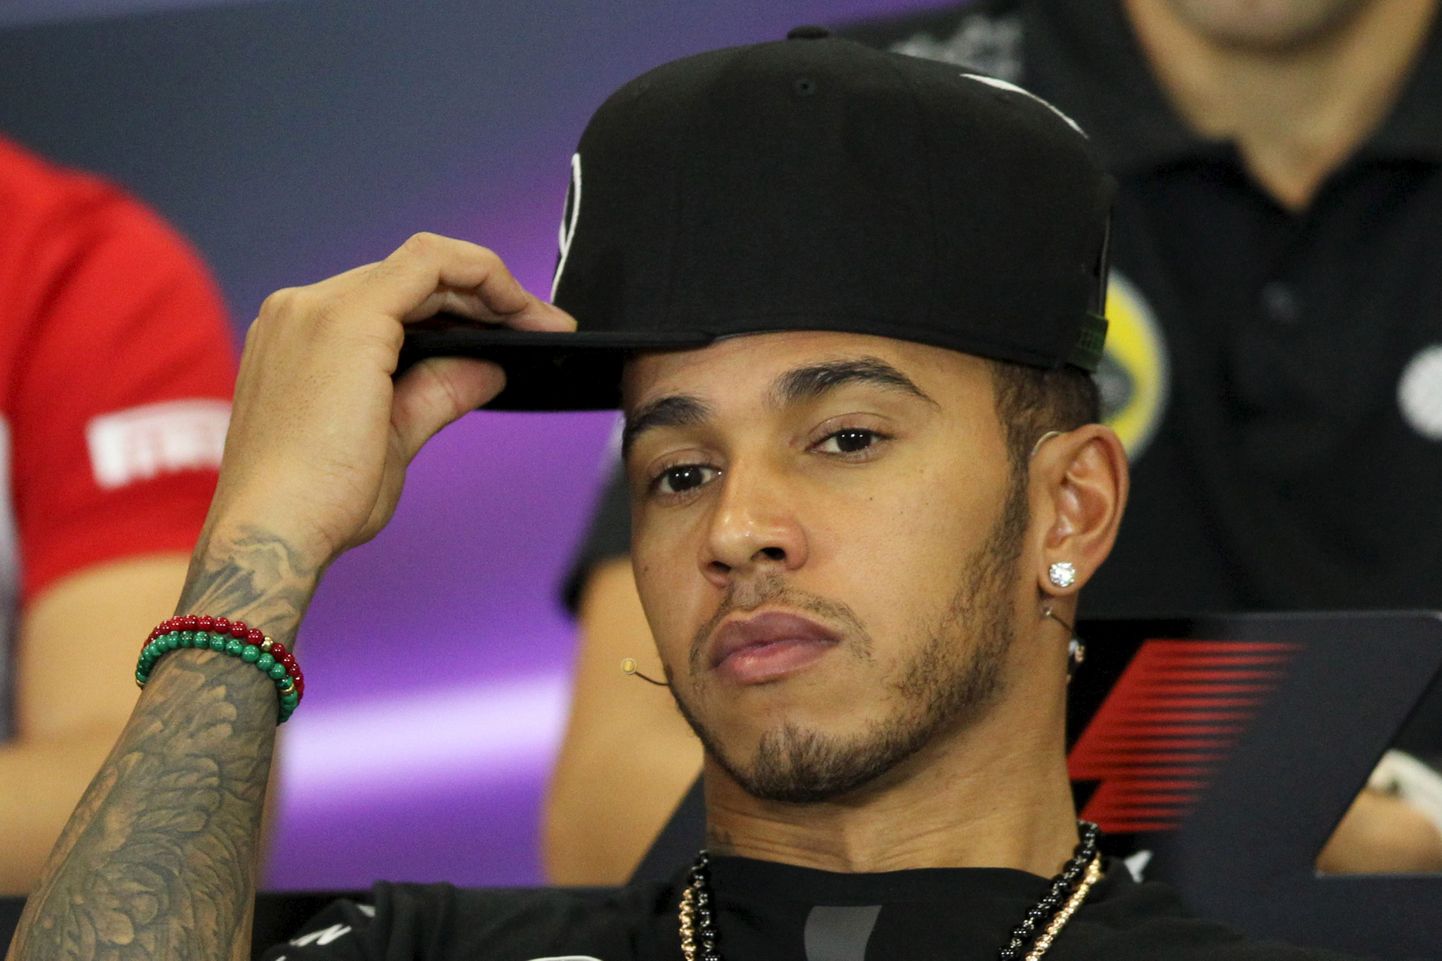 Mercedes Formula One driver Lewis Hamilton of Britain adjusts his cap during a news conference before Mexican F1 Grand Prix at Autodromo Hermanos Rodriguez in Mexico City, October 29, 2015. REUTERS/Edgard Garrido